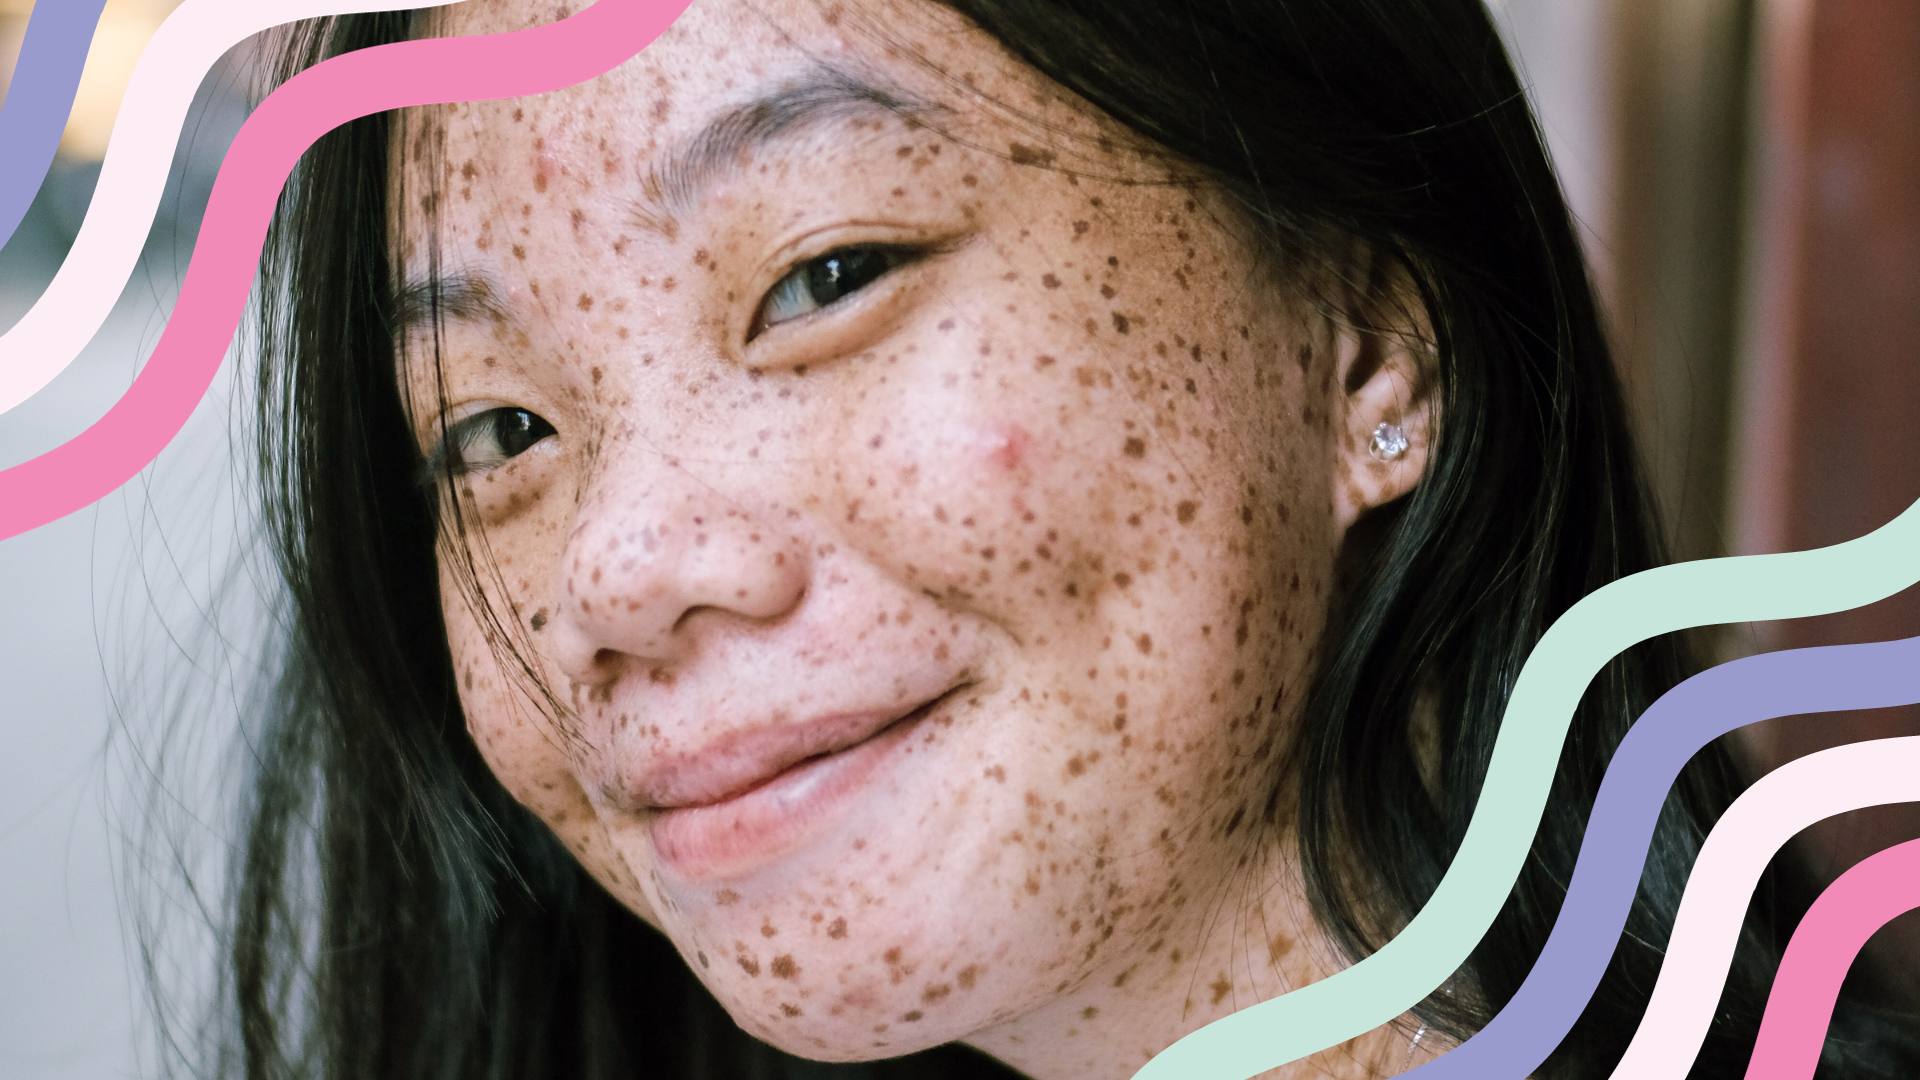 Natural Skincare for Acne-Prone Skin: 8 Tips for Clear and Healthy Skin